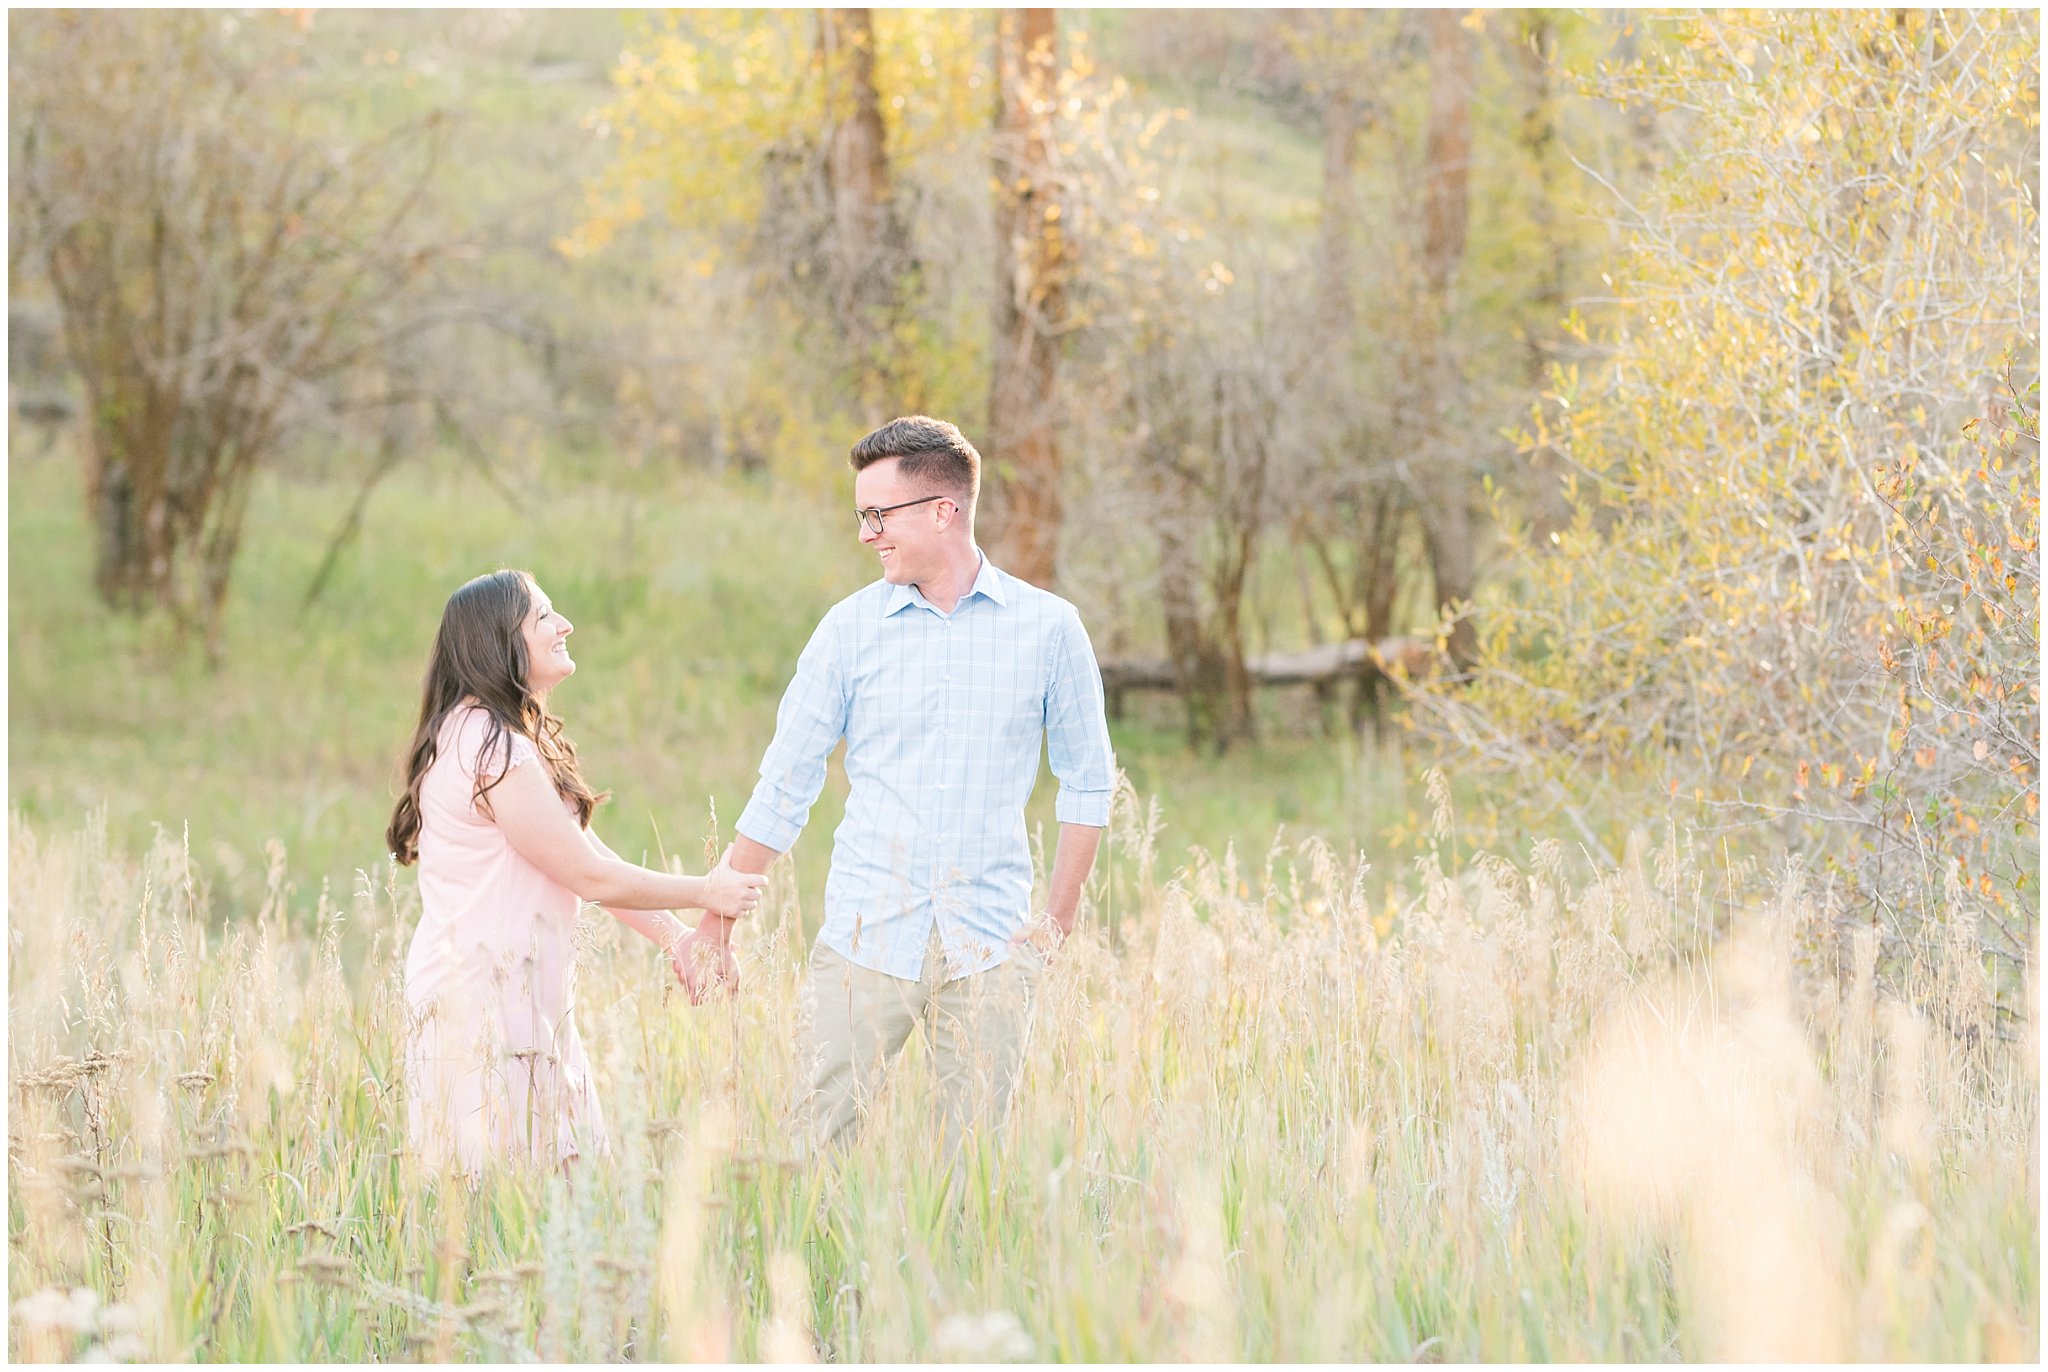 Couple in light blue shirt, tan pants and blush dress | Snowbasin woods and fall trees | A Classic Snowbasin Fall Engagement Session | Jessie and Dallin Photography